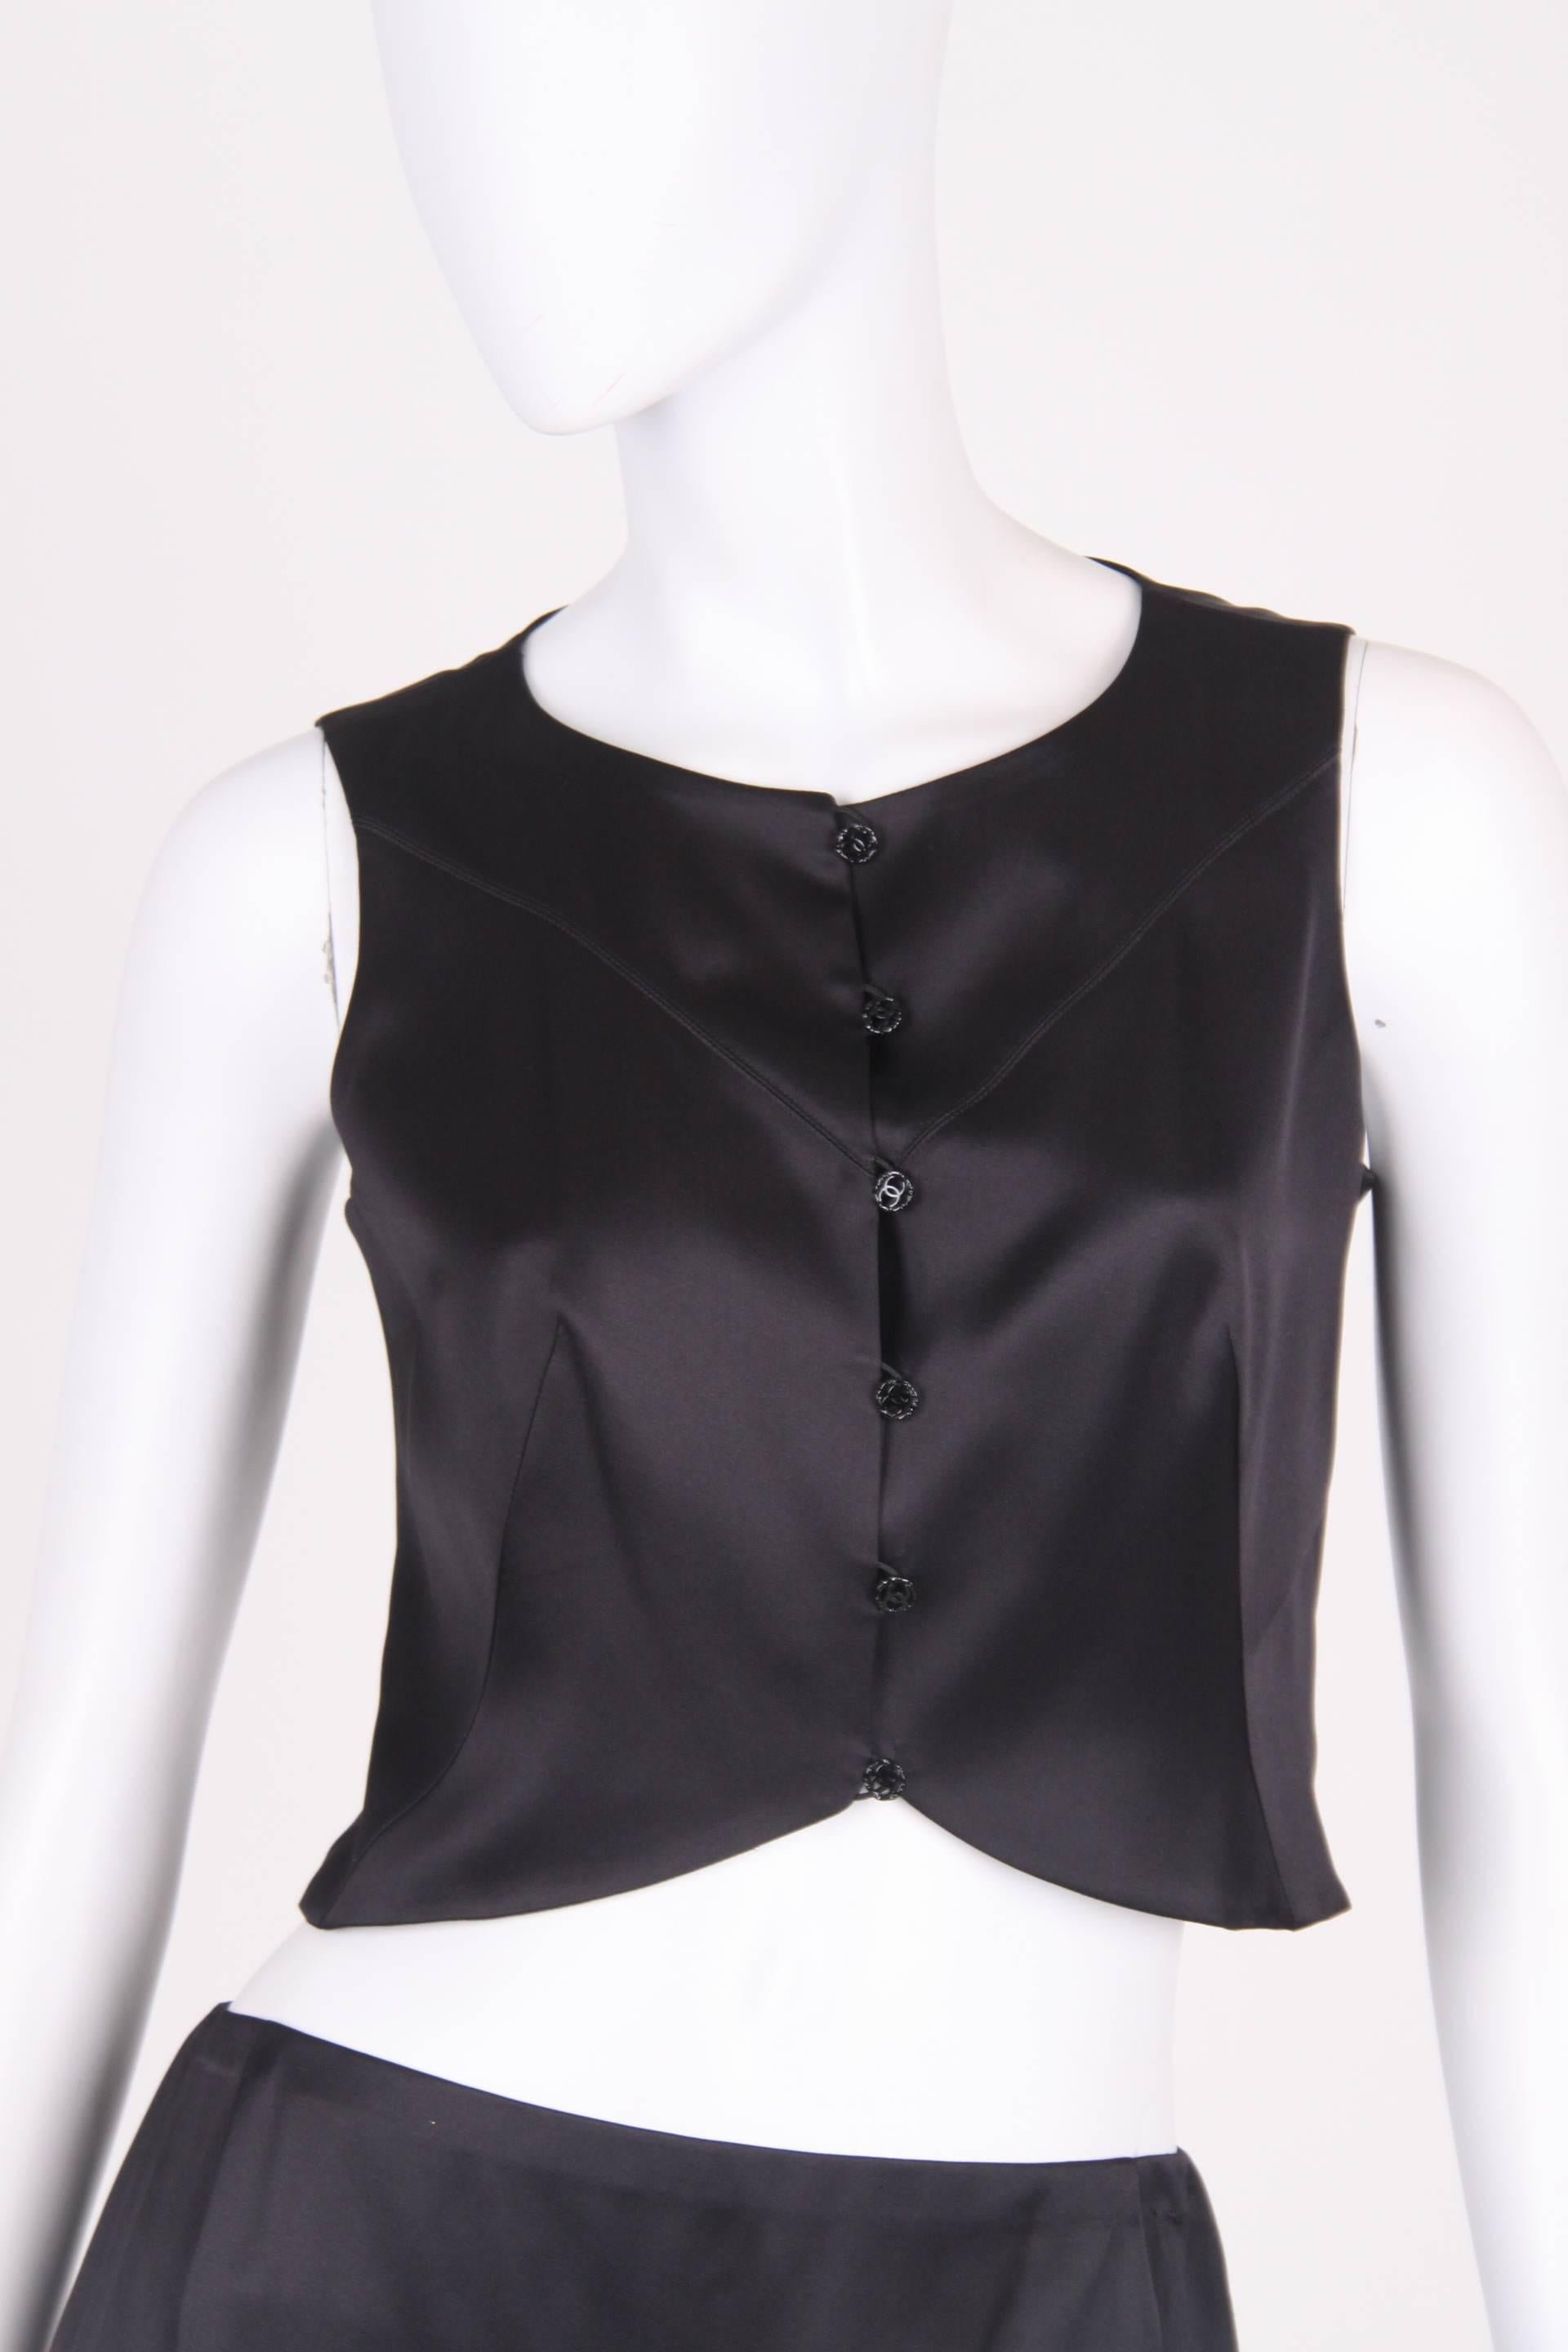 Stylish two piece suit by Chanel; a black silk top and skirt.

The sleeveless top has tailored fitting and front closure with six metal buttons. These shiny black buttons all have a CC logo in the center. A round neckline and fully lined.

Size: